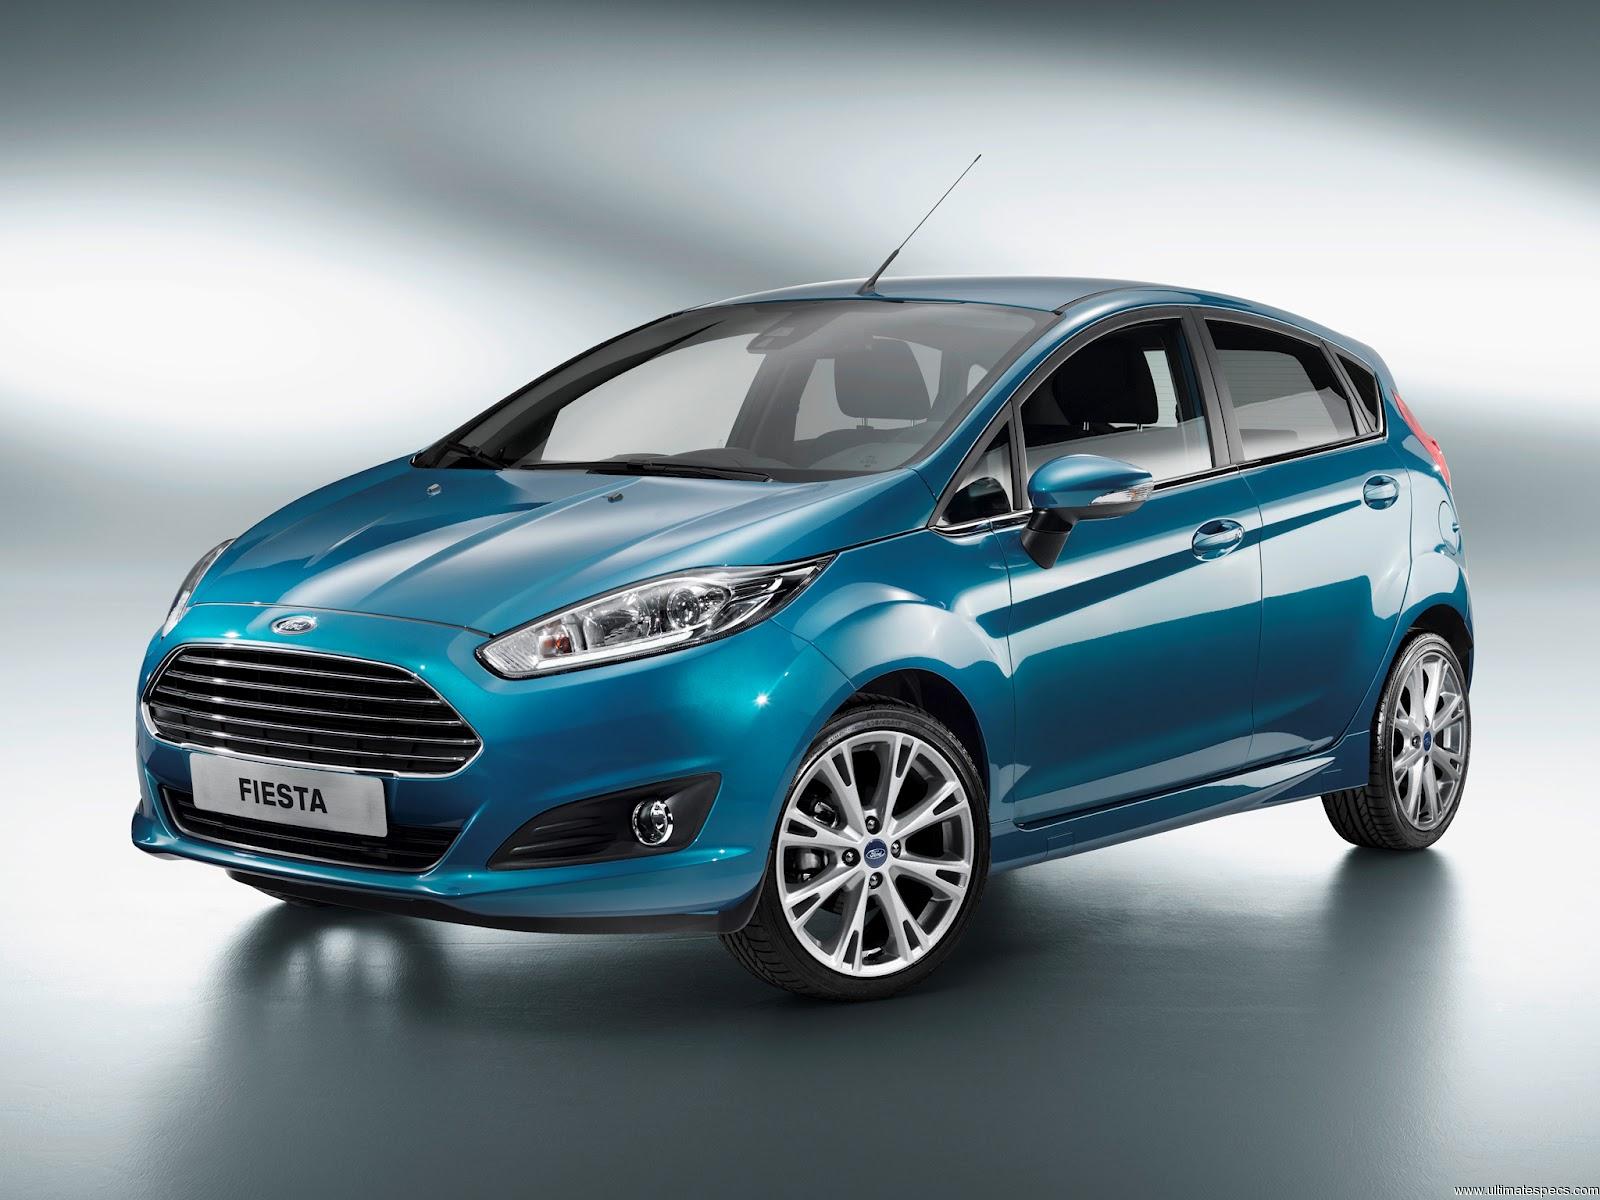 Ford Fiesta 7 2012 Facelift image